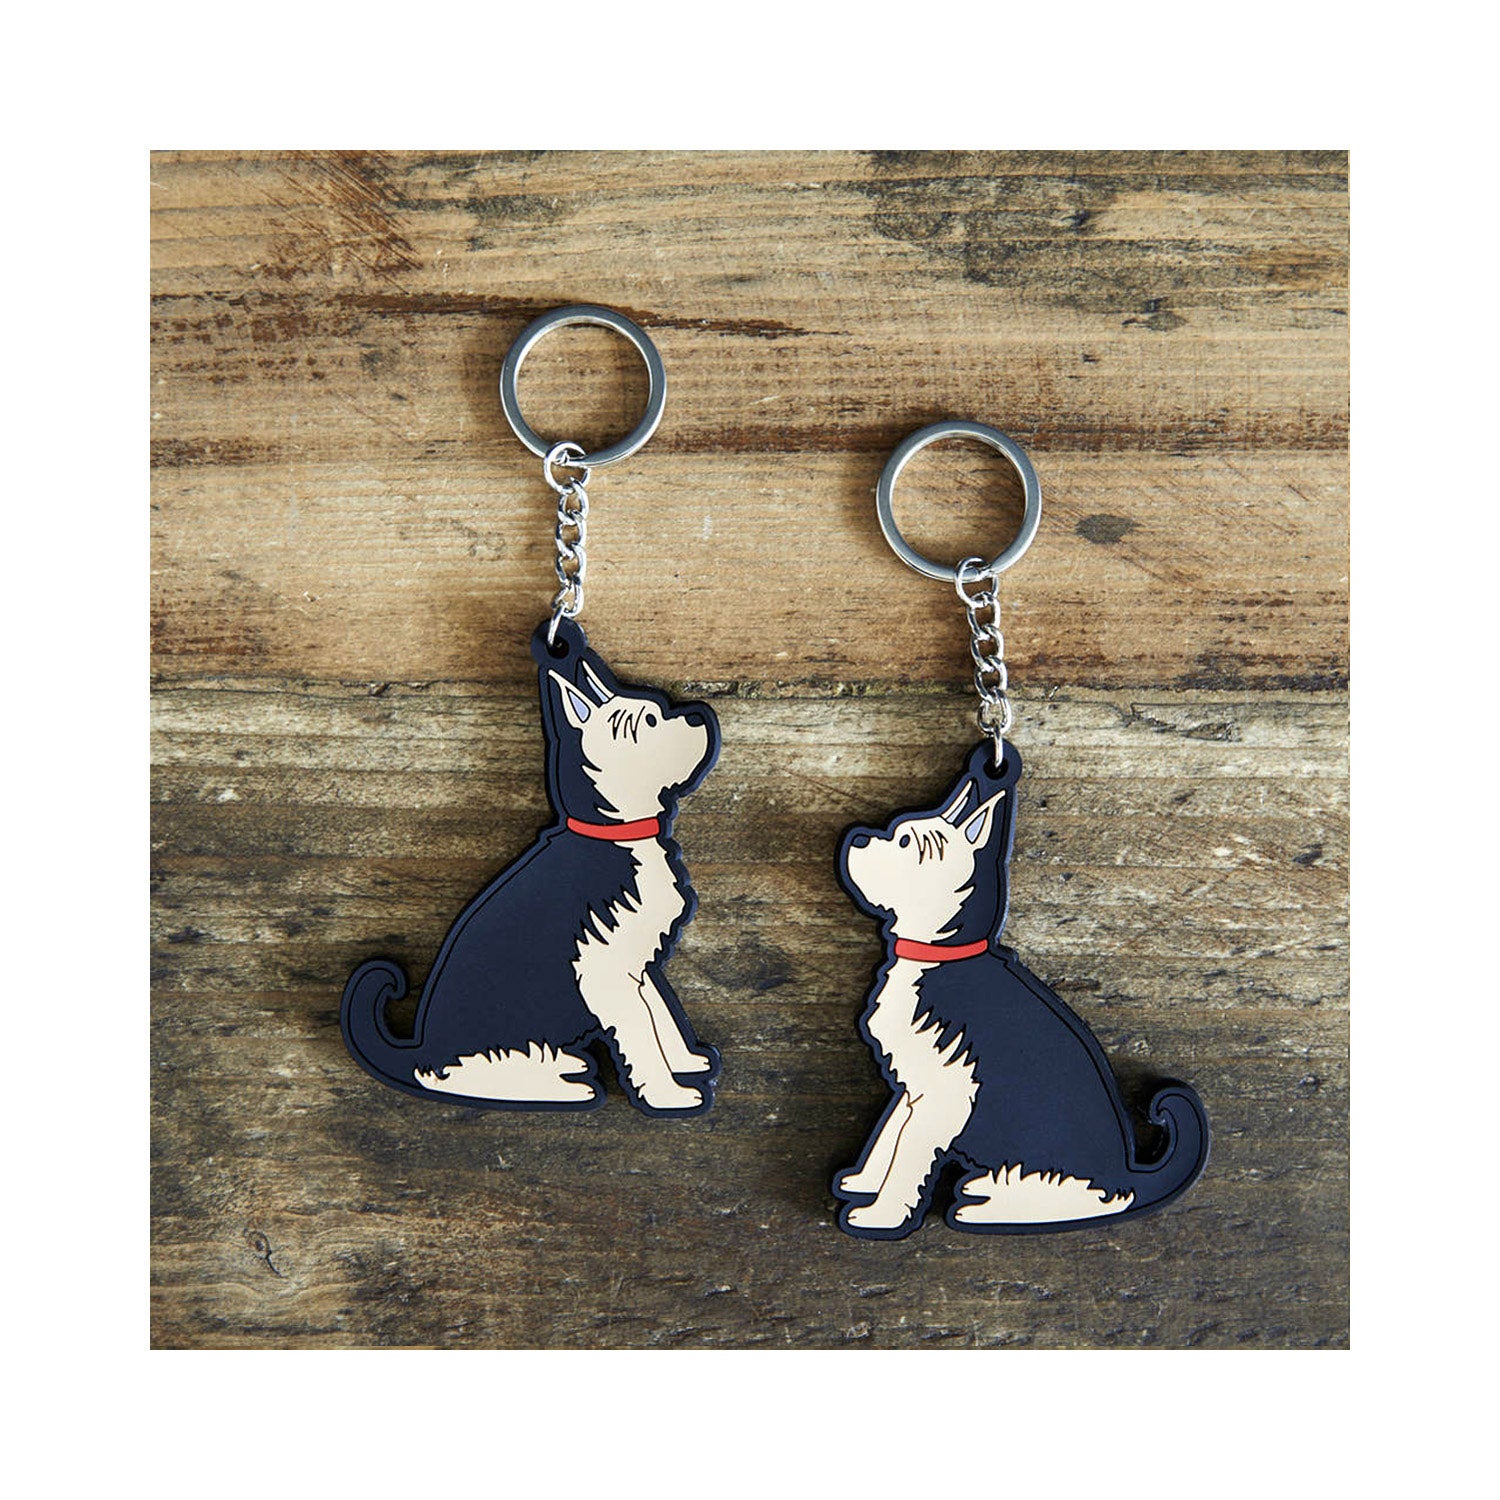 Dog Lover Gifts available at Dog Krazy Gifts - Ella The Yorkshire Terrier Keyring- part of the Sweet William range available from Dog Krazy Gifts